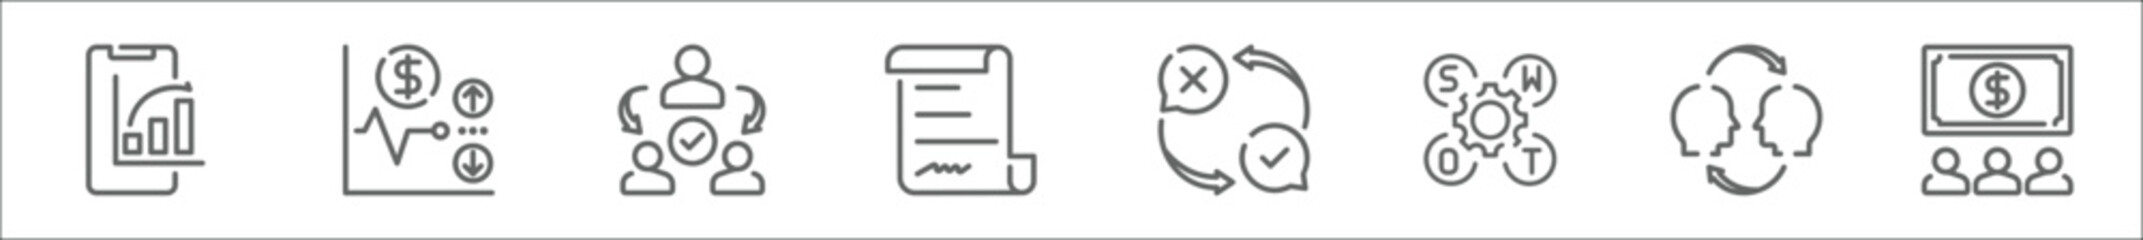 outline set of businessman line icons. linear vector icons such as analytics, volatility, delegation, authorization, decision making, swot analysis, mentorship, dividend